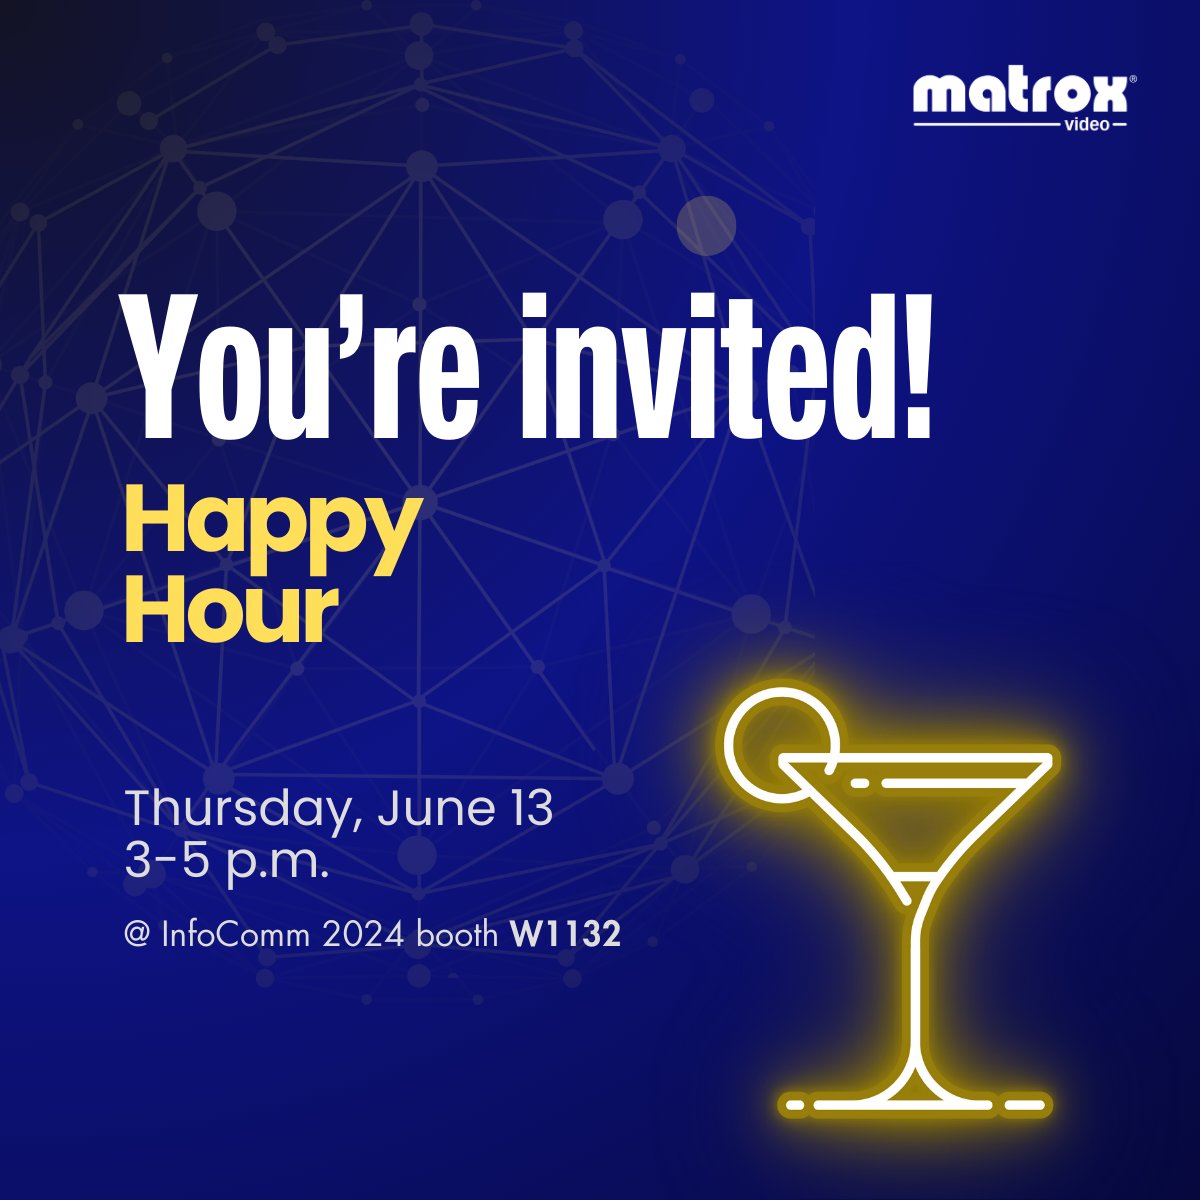 Let’s raise a glass to ProAV industry innovation! 🥂

You're invited to join us for an evening of fun and networking at @InfoComm.

RSVP today—spots are filling up fast!  pulse.ly/peml8j3fgo